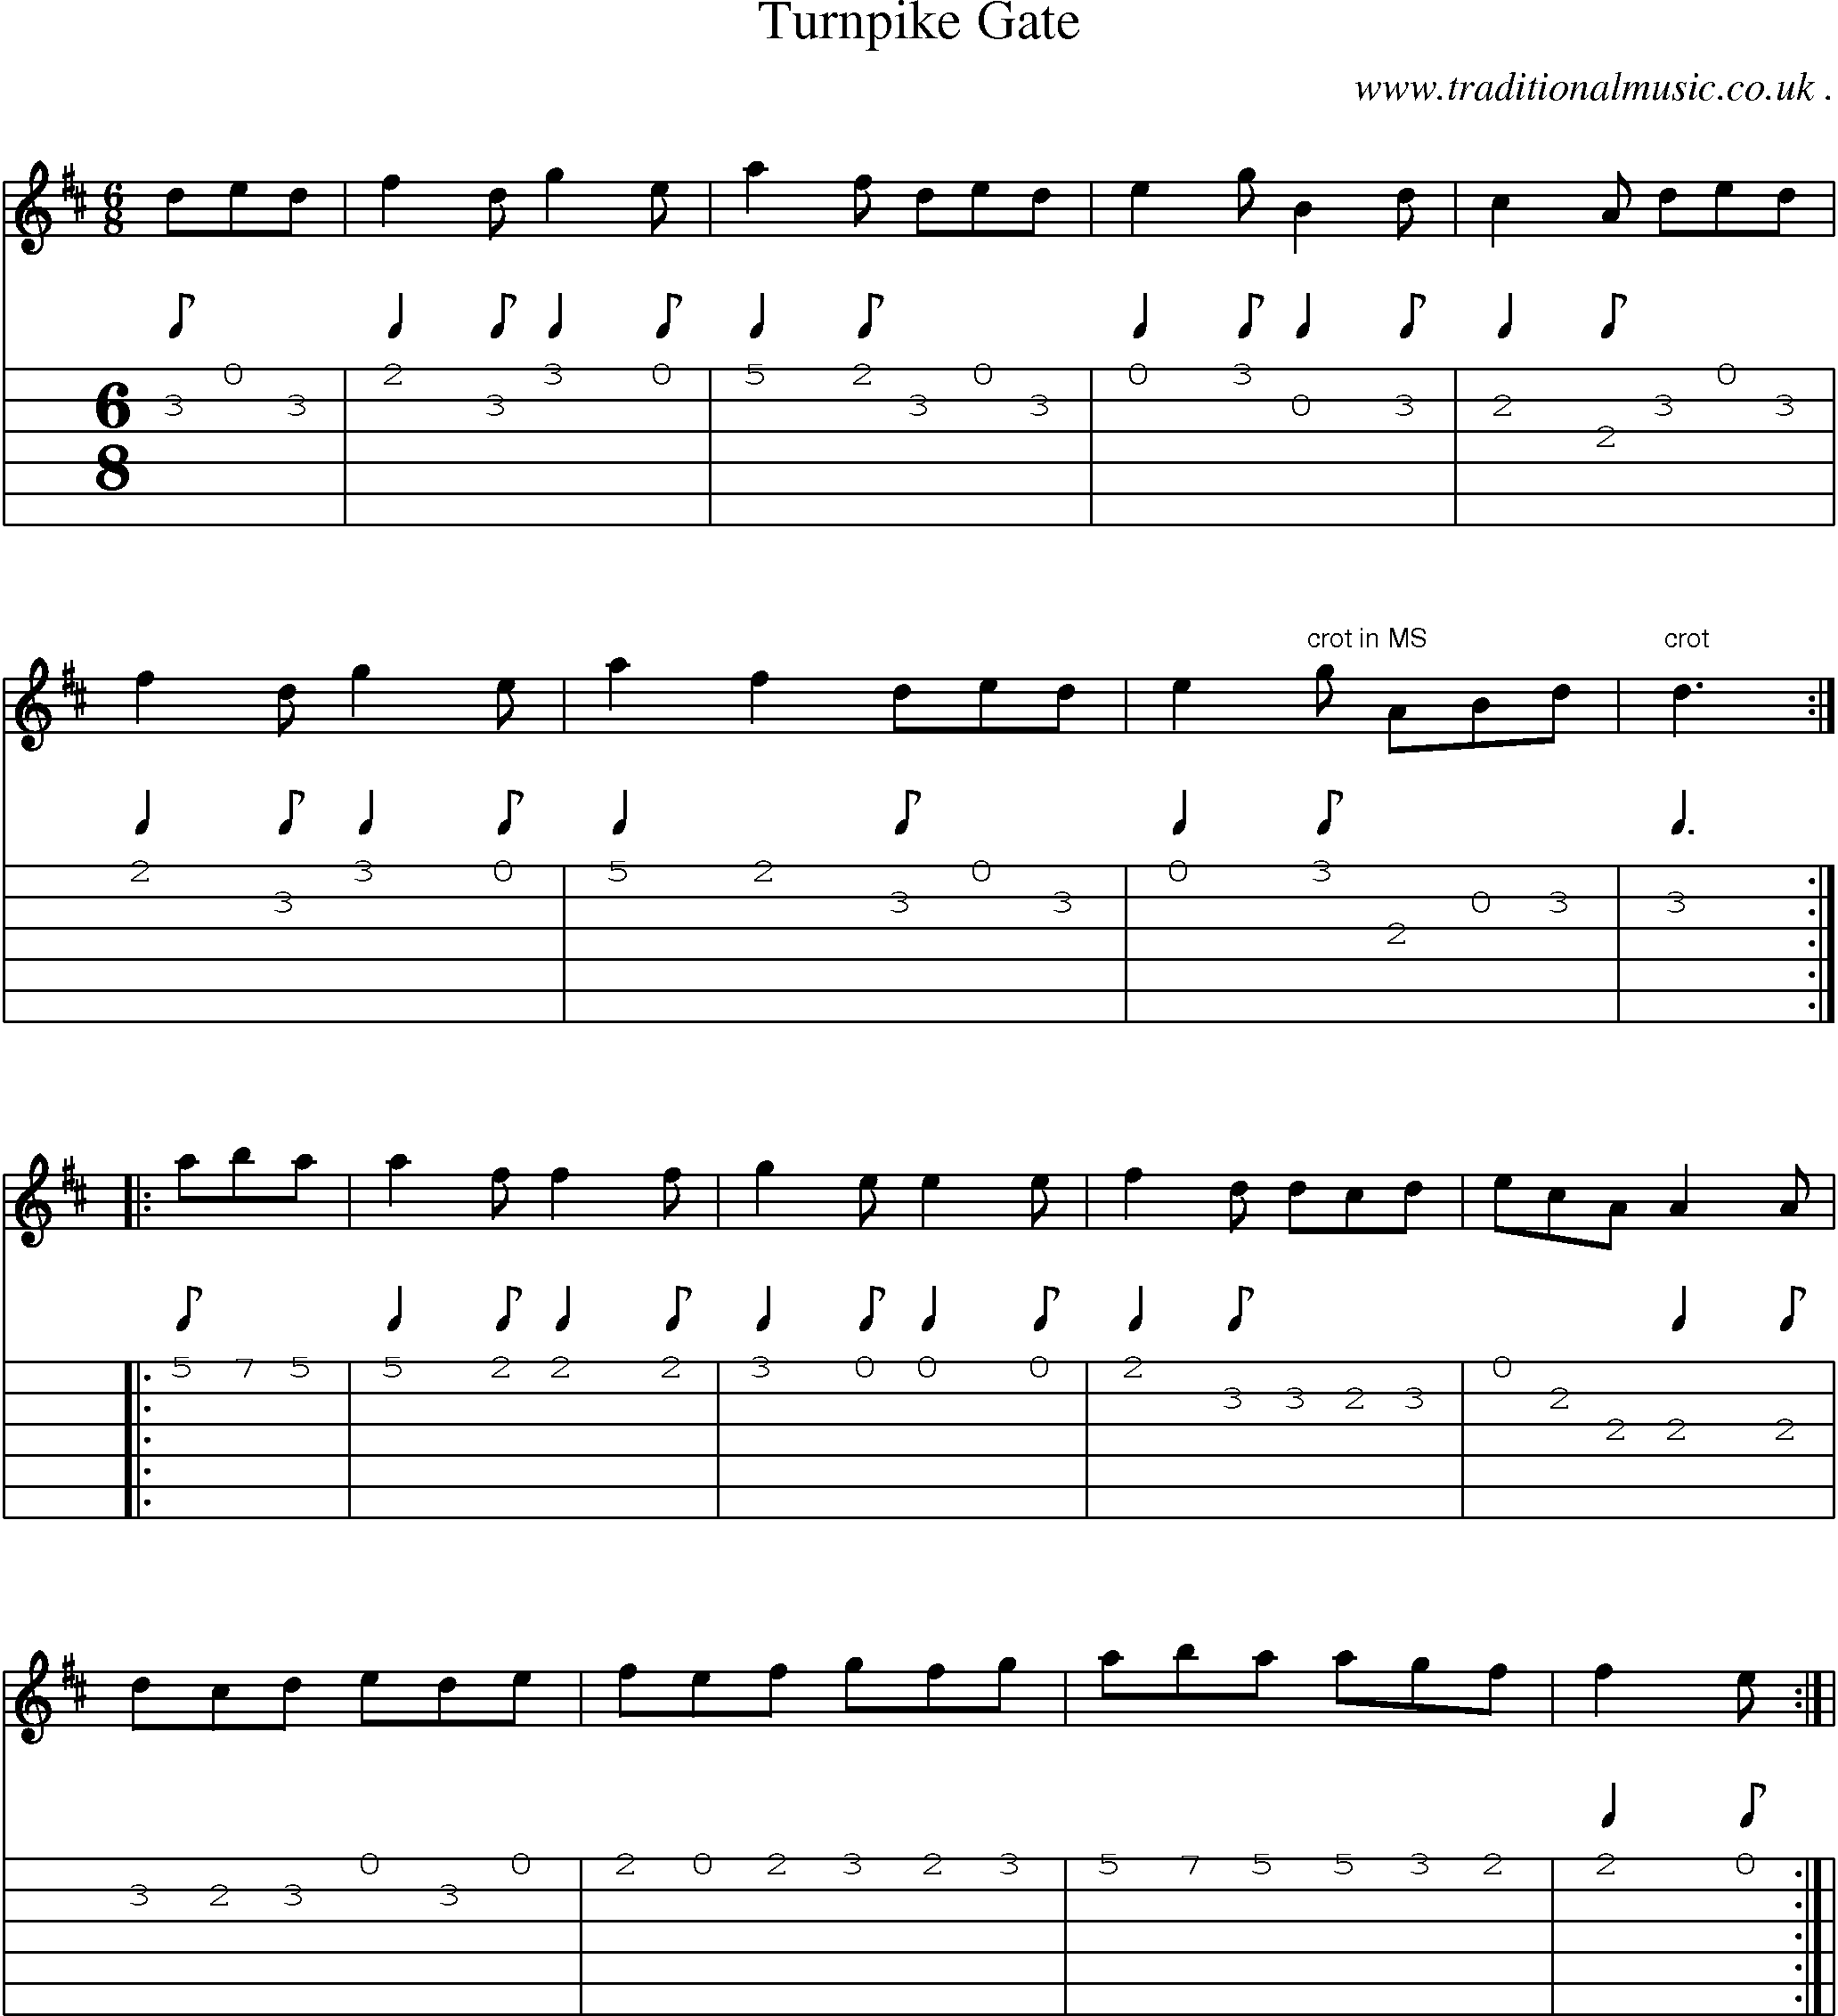 Sheet-Music and Guitar Tabs for Turnpike Gate